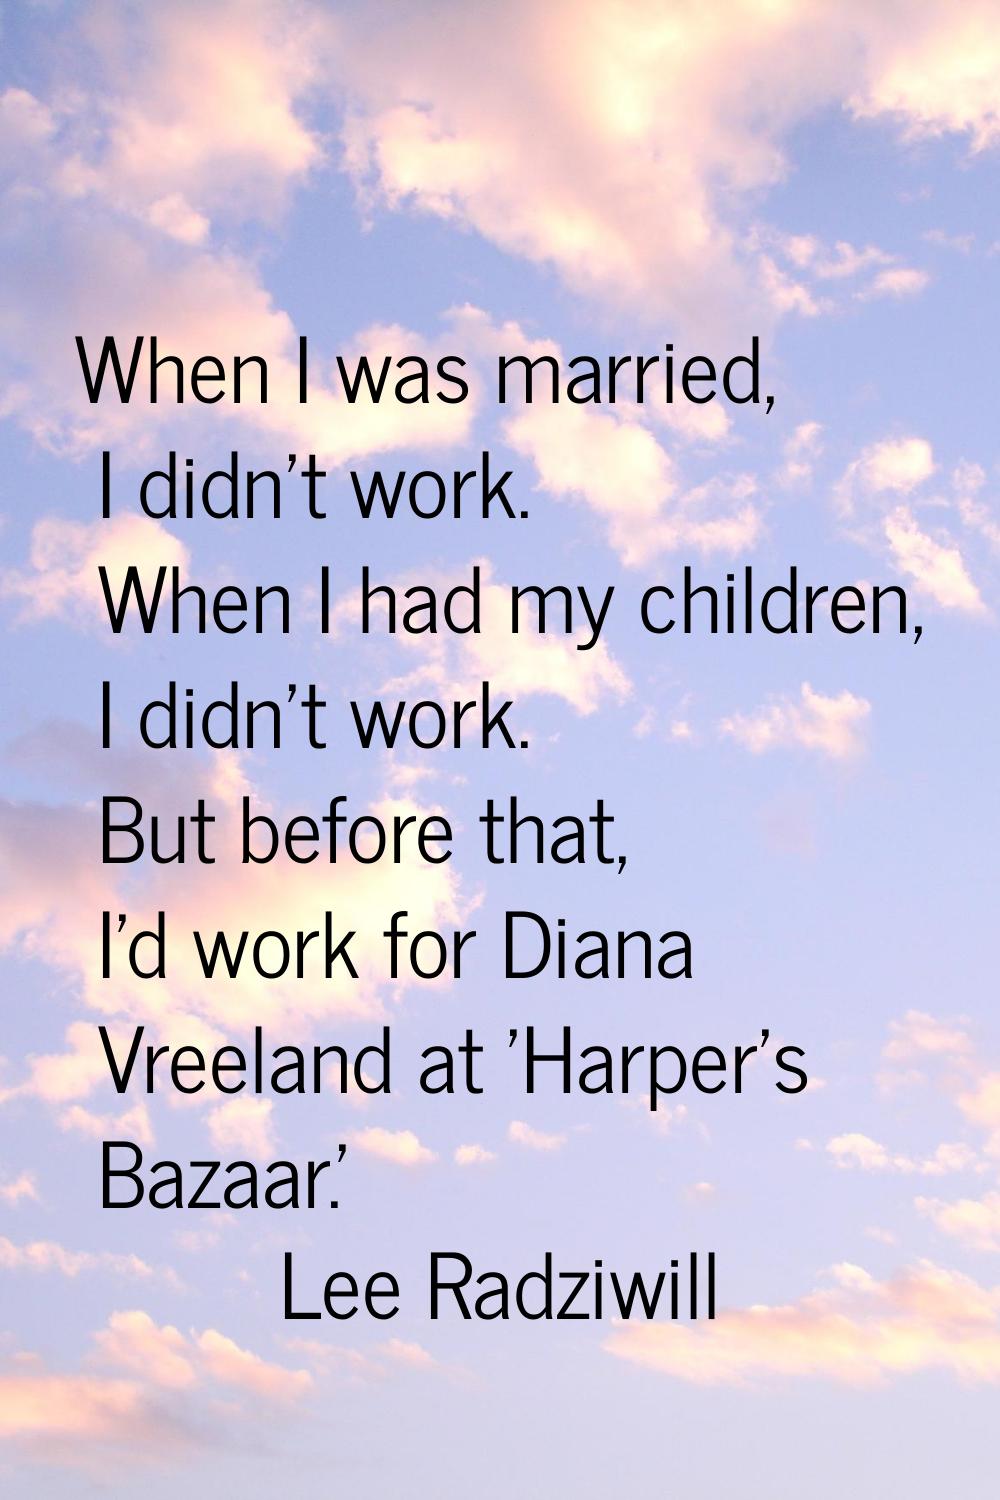 When I was married, I didn't work. When I had my children, I didn't work. But before that, I'd work